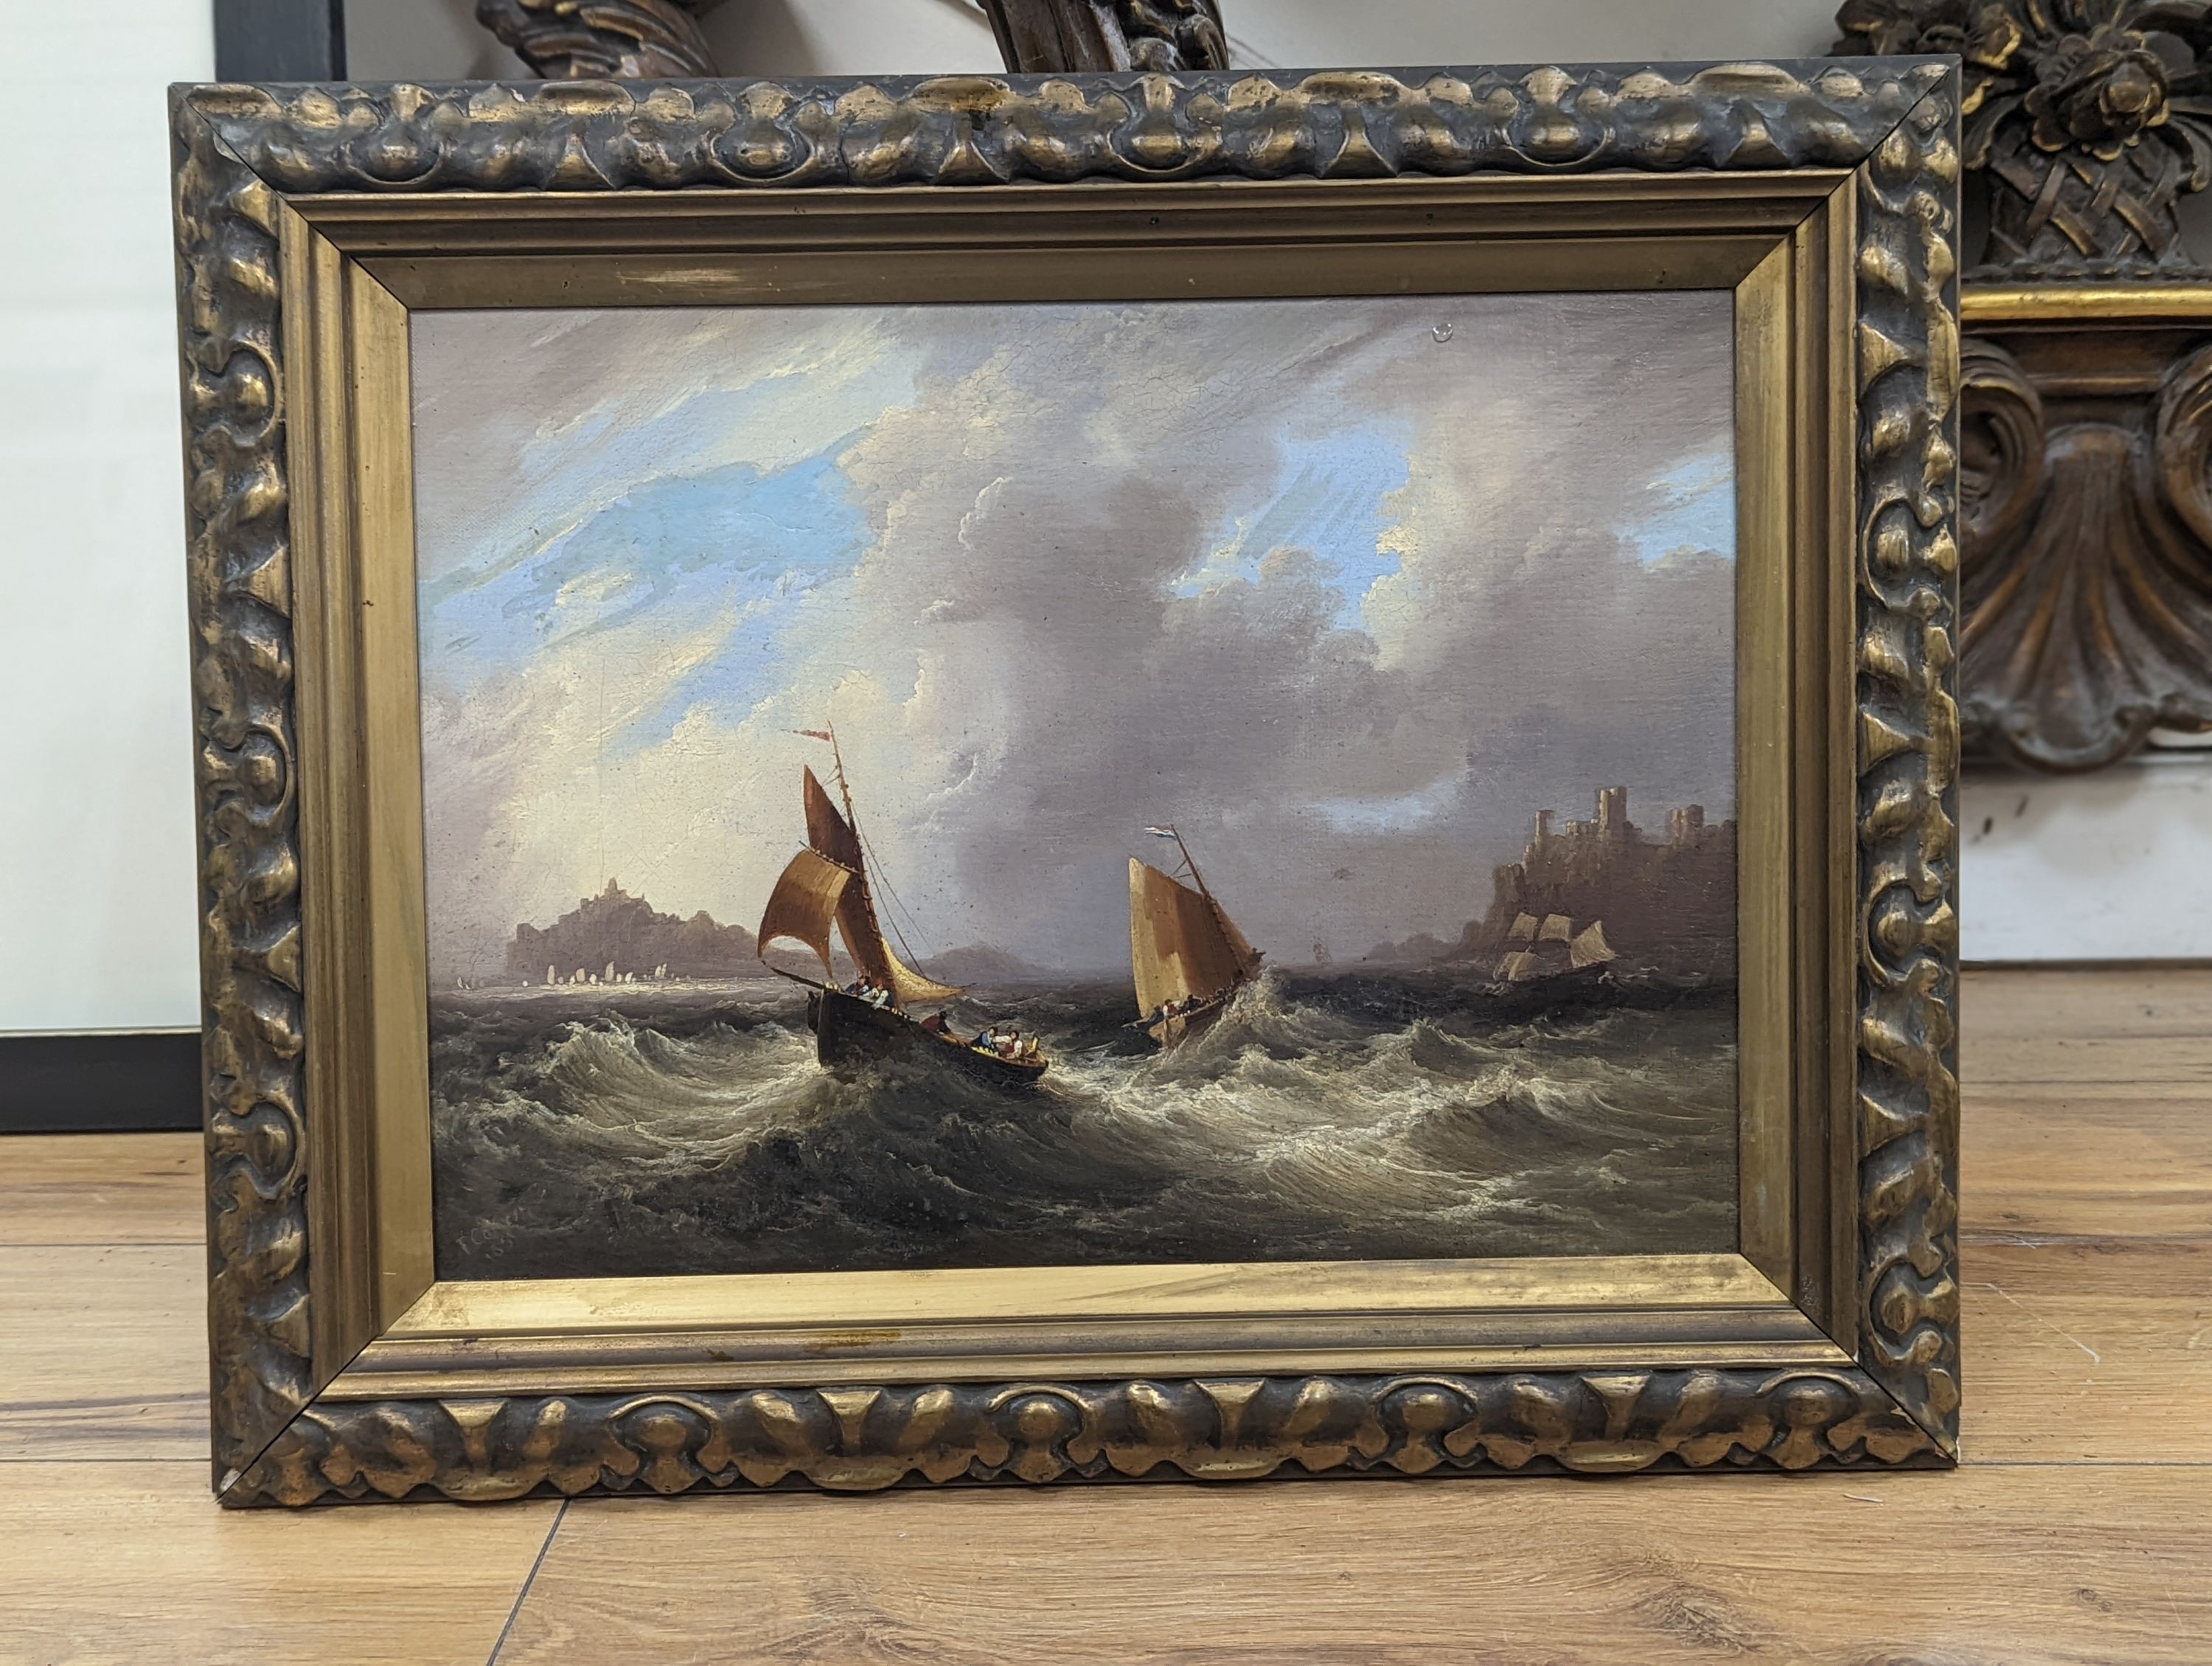 F. Calvert (19th C.), oil on canvas, Fishing boats off the coast, signed and dated 1831, 29 x 39cm